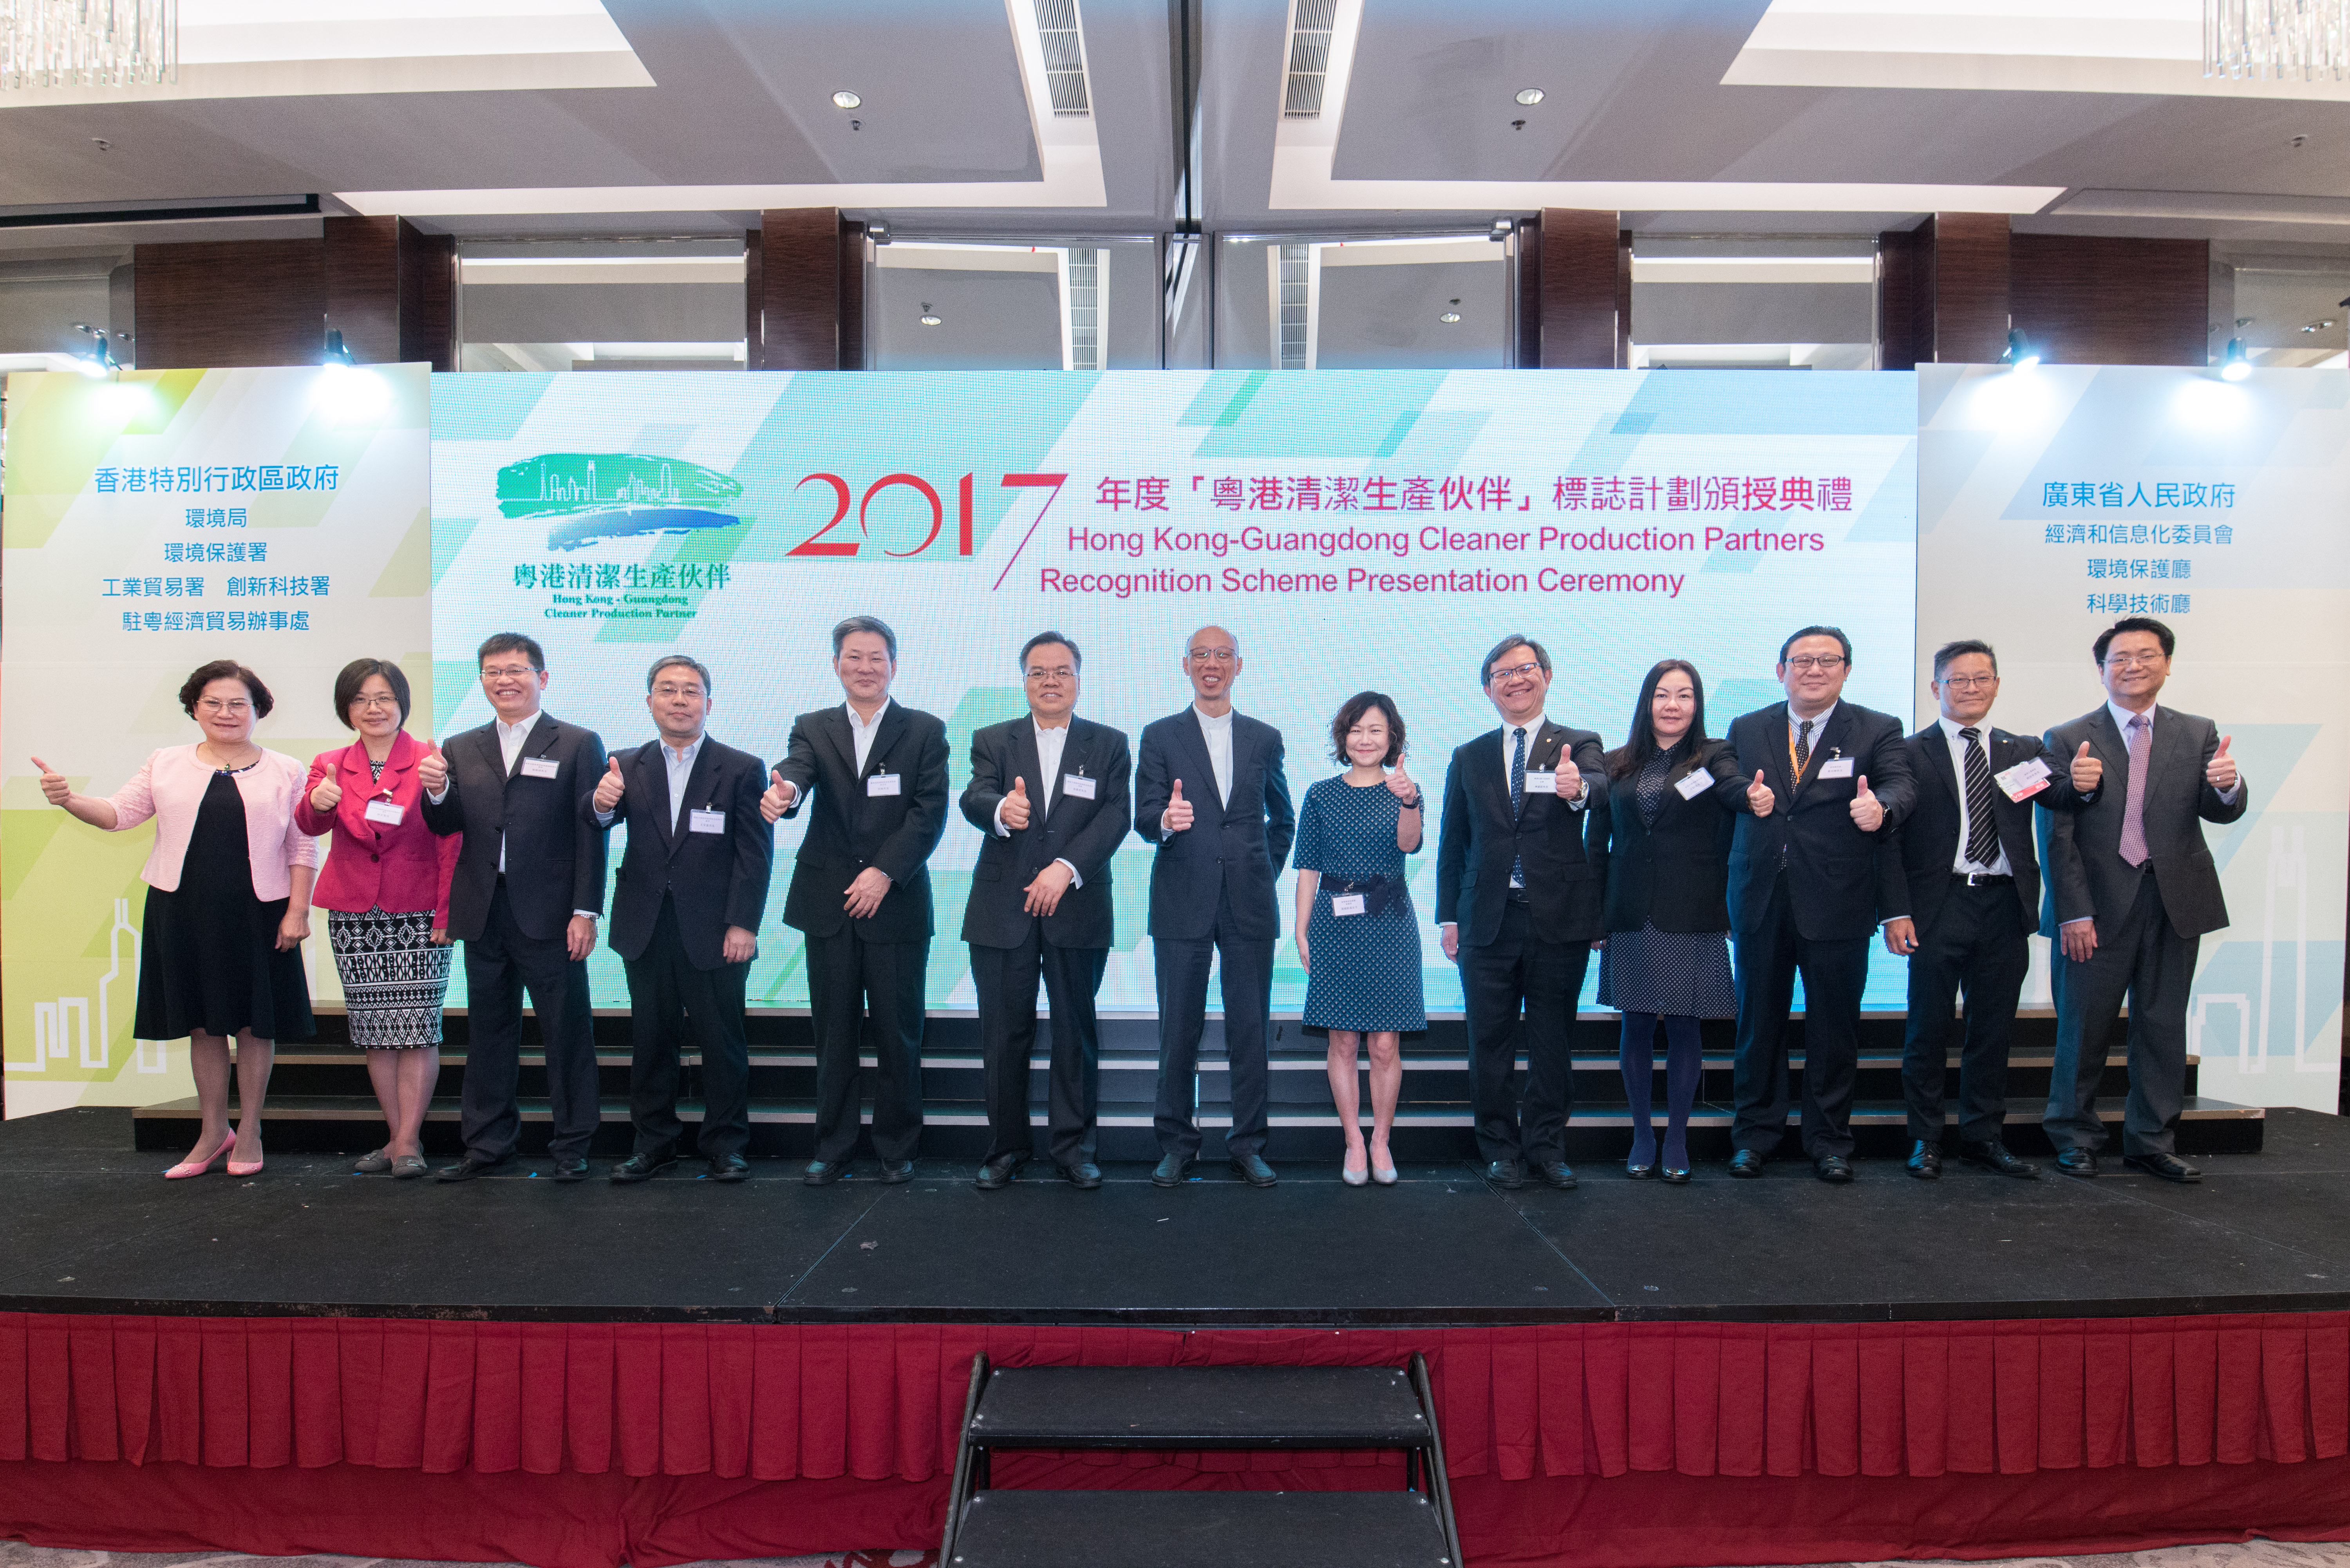 The Secretary for the Environment, Mr Wong Kam-sing, today (December 16) officiated in Guangzhou at the presentation ceremony for the Hong Kong-Guangdong Cleaner Production Partners Recognition Scheme to commend the efforts of more than 140 Hong Kong-owned enterprises in pursuing cleaner production. Photo shows Mr Wong (back row, fifth left) with some of the awardees.